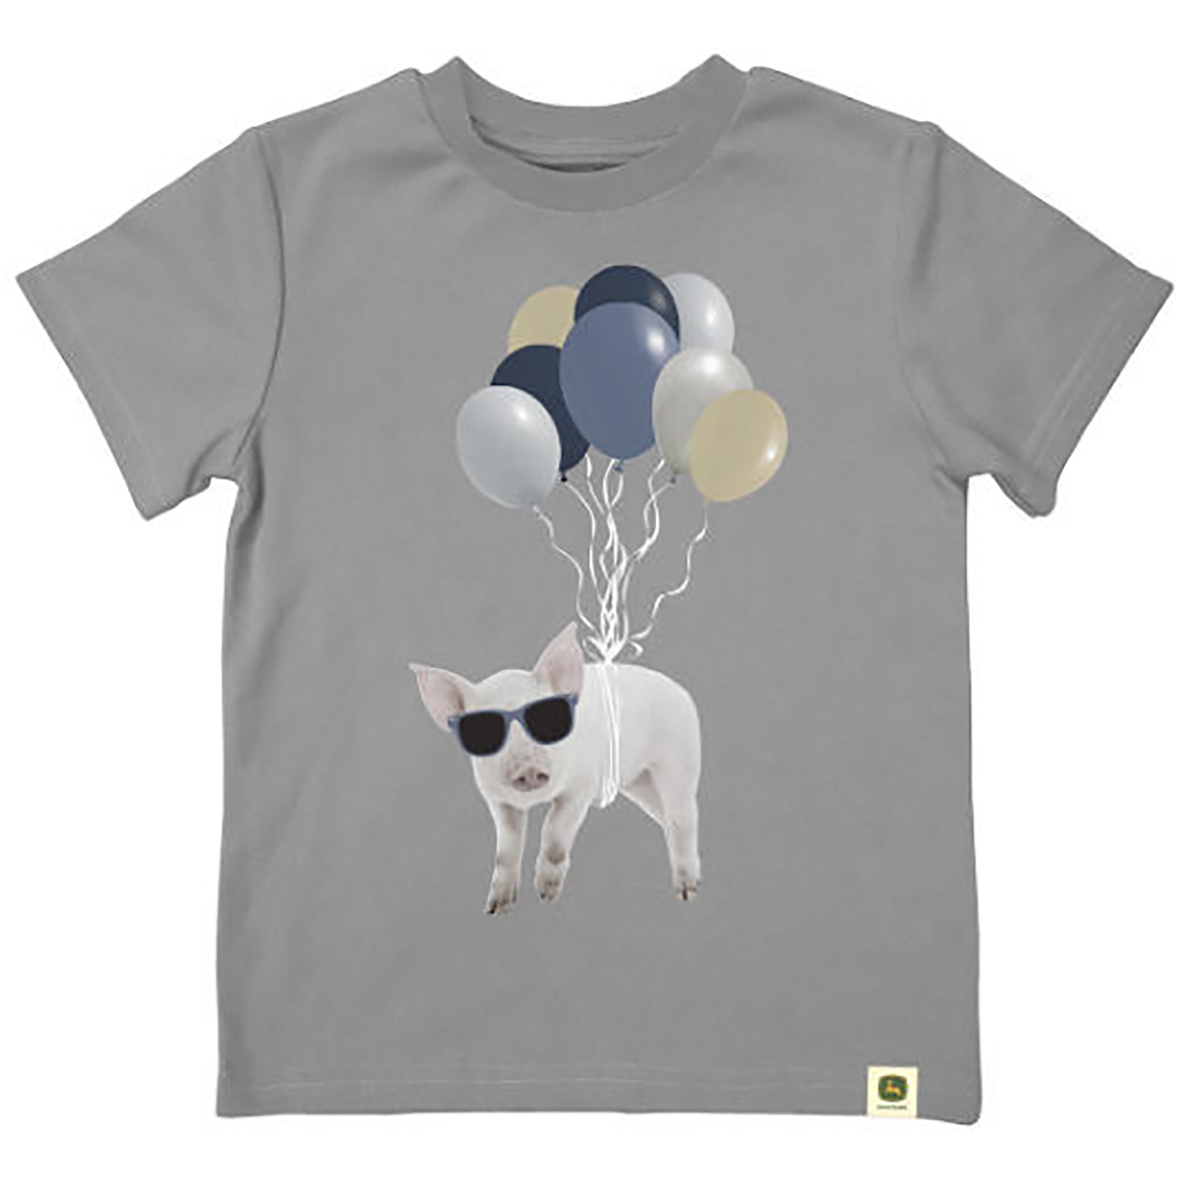 Do Good Today Pig and Balloons Tee